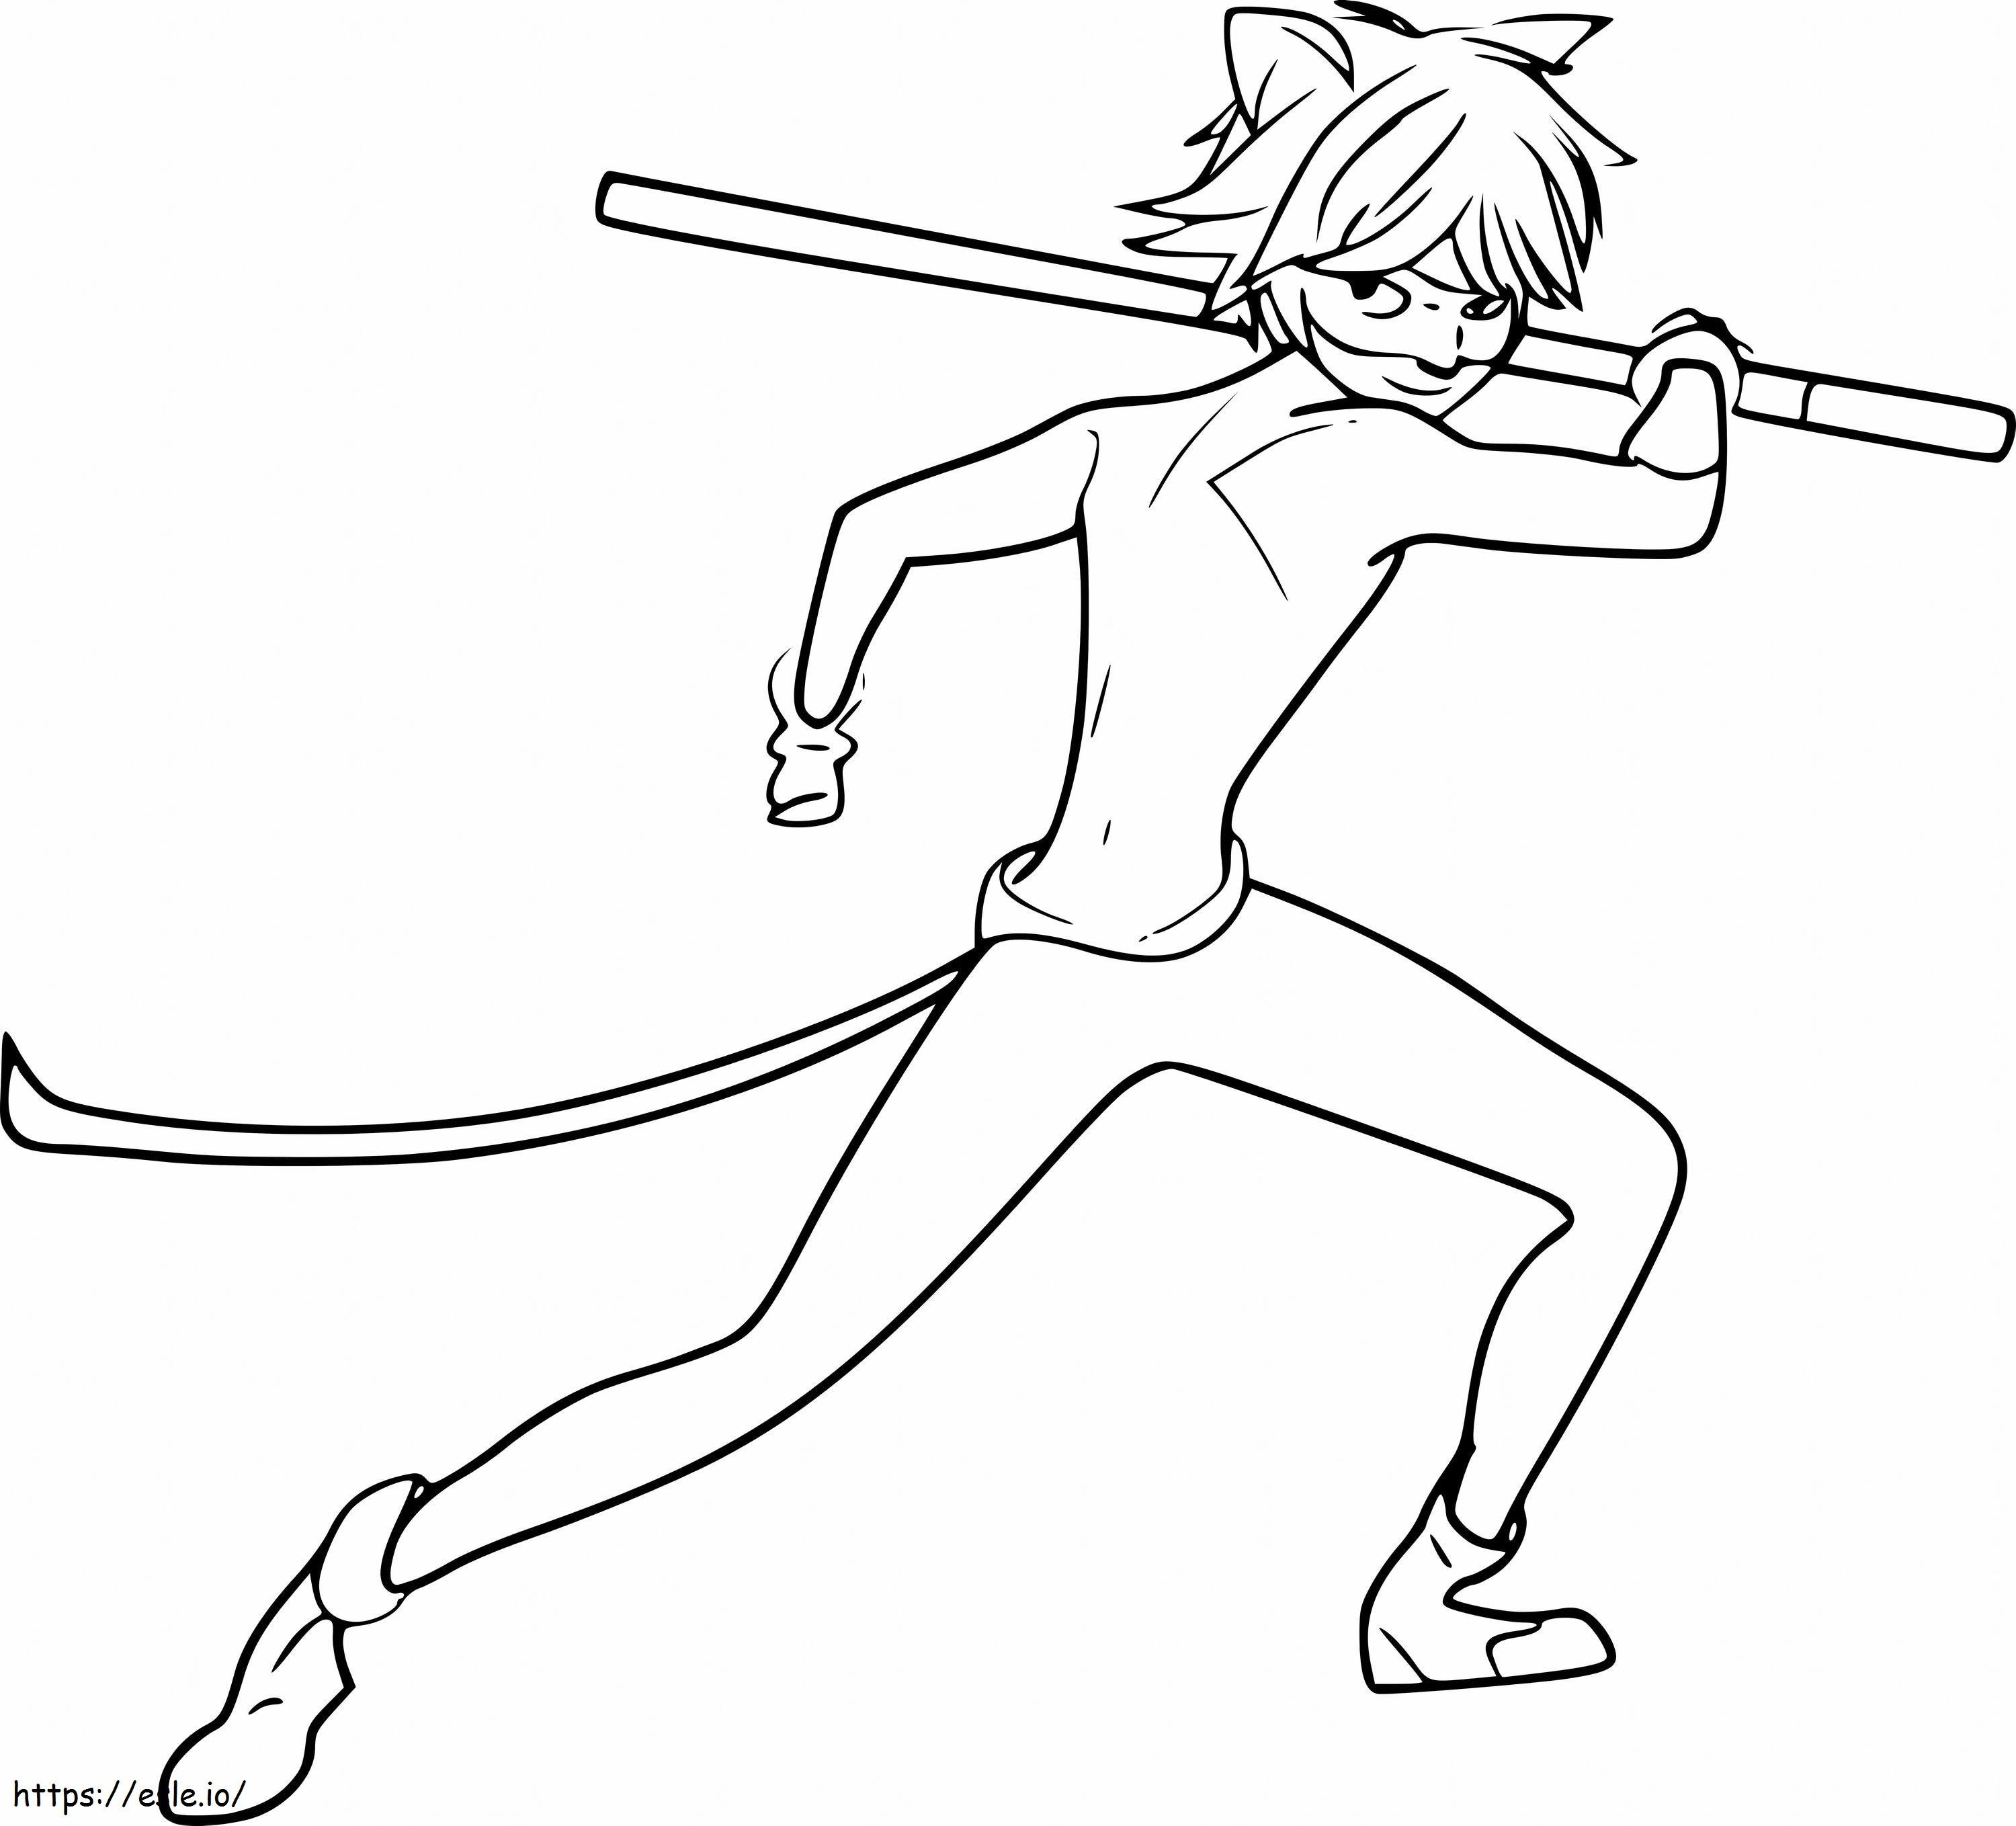 1531452942 Cat Noir Fighting A4 coloring page